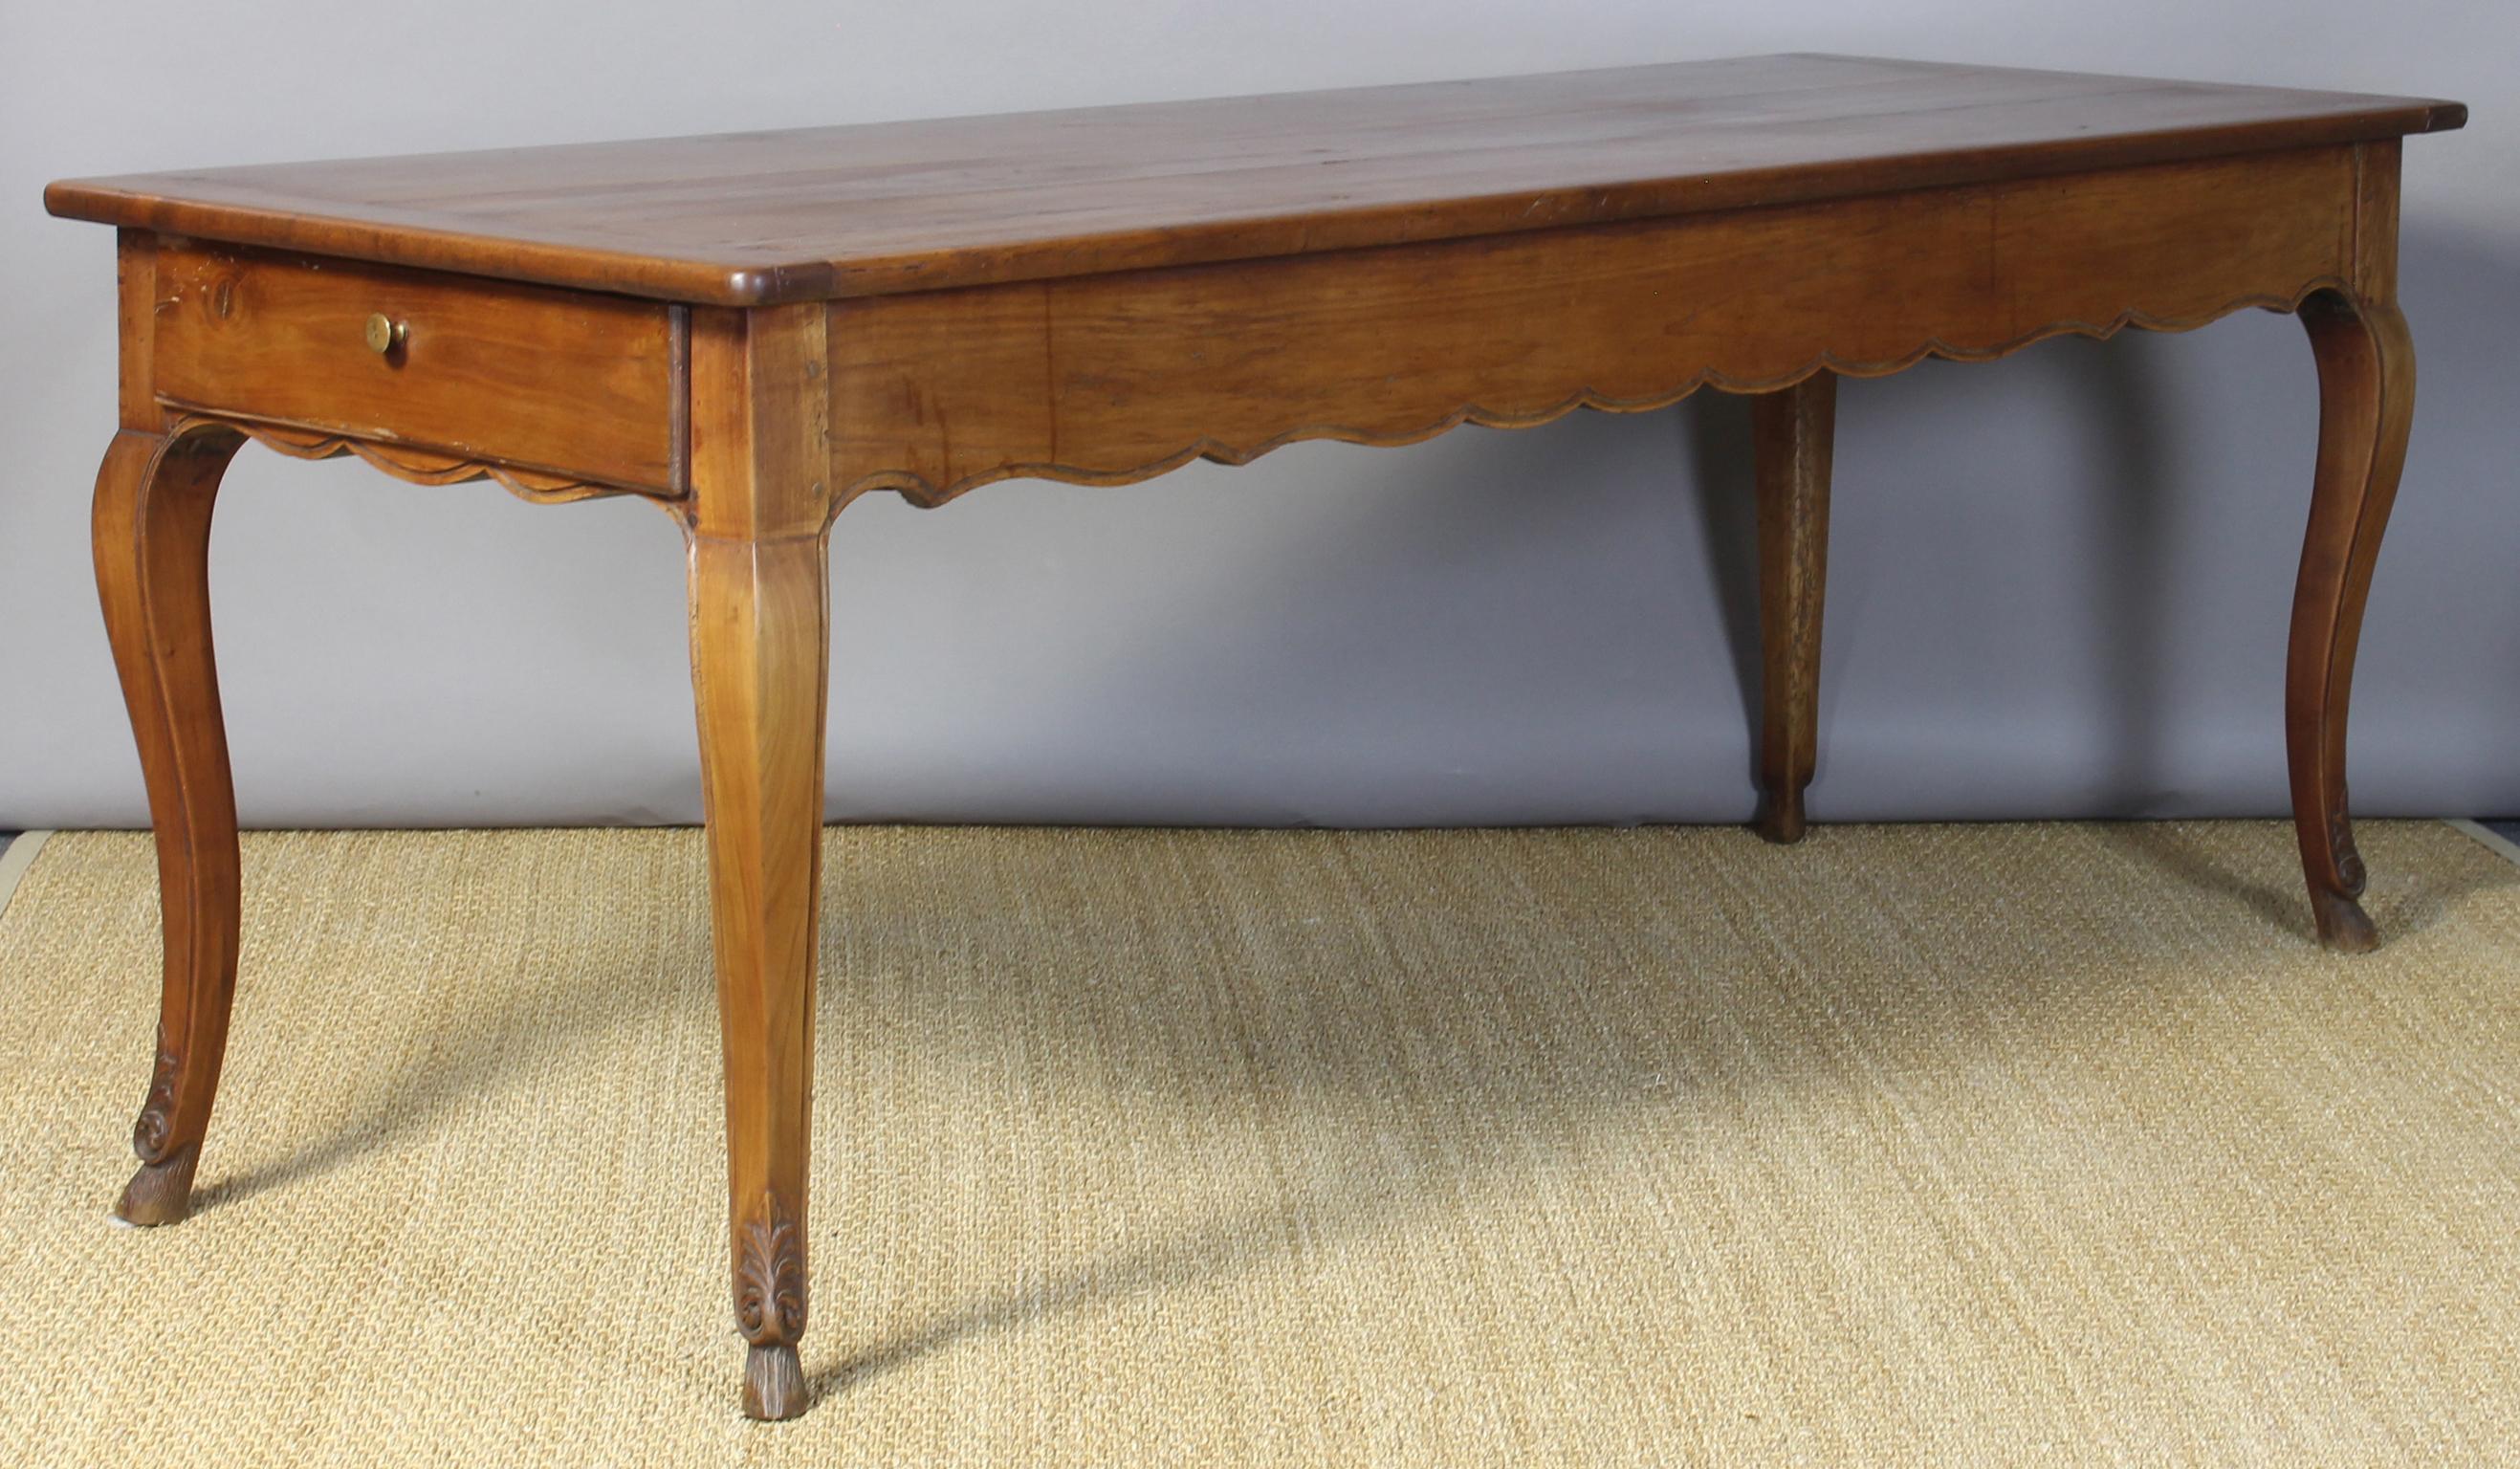 A simple and elegant early 19th century French farm or dining table in cherrywood with molded scalloped apron and cabriole legs terminating into delicately carved feet. The long and narrow table has a wonderful patina and an operating drawer at one